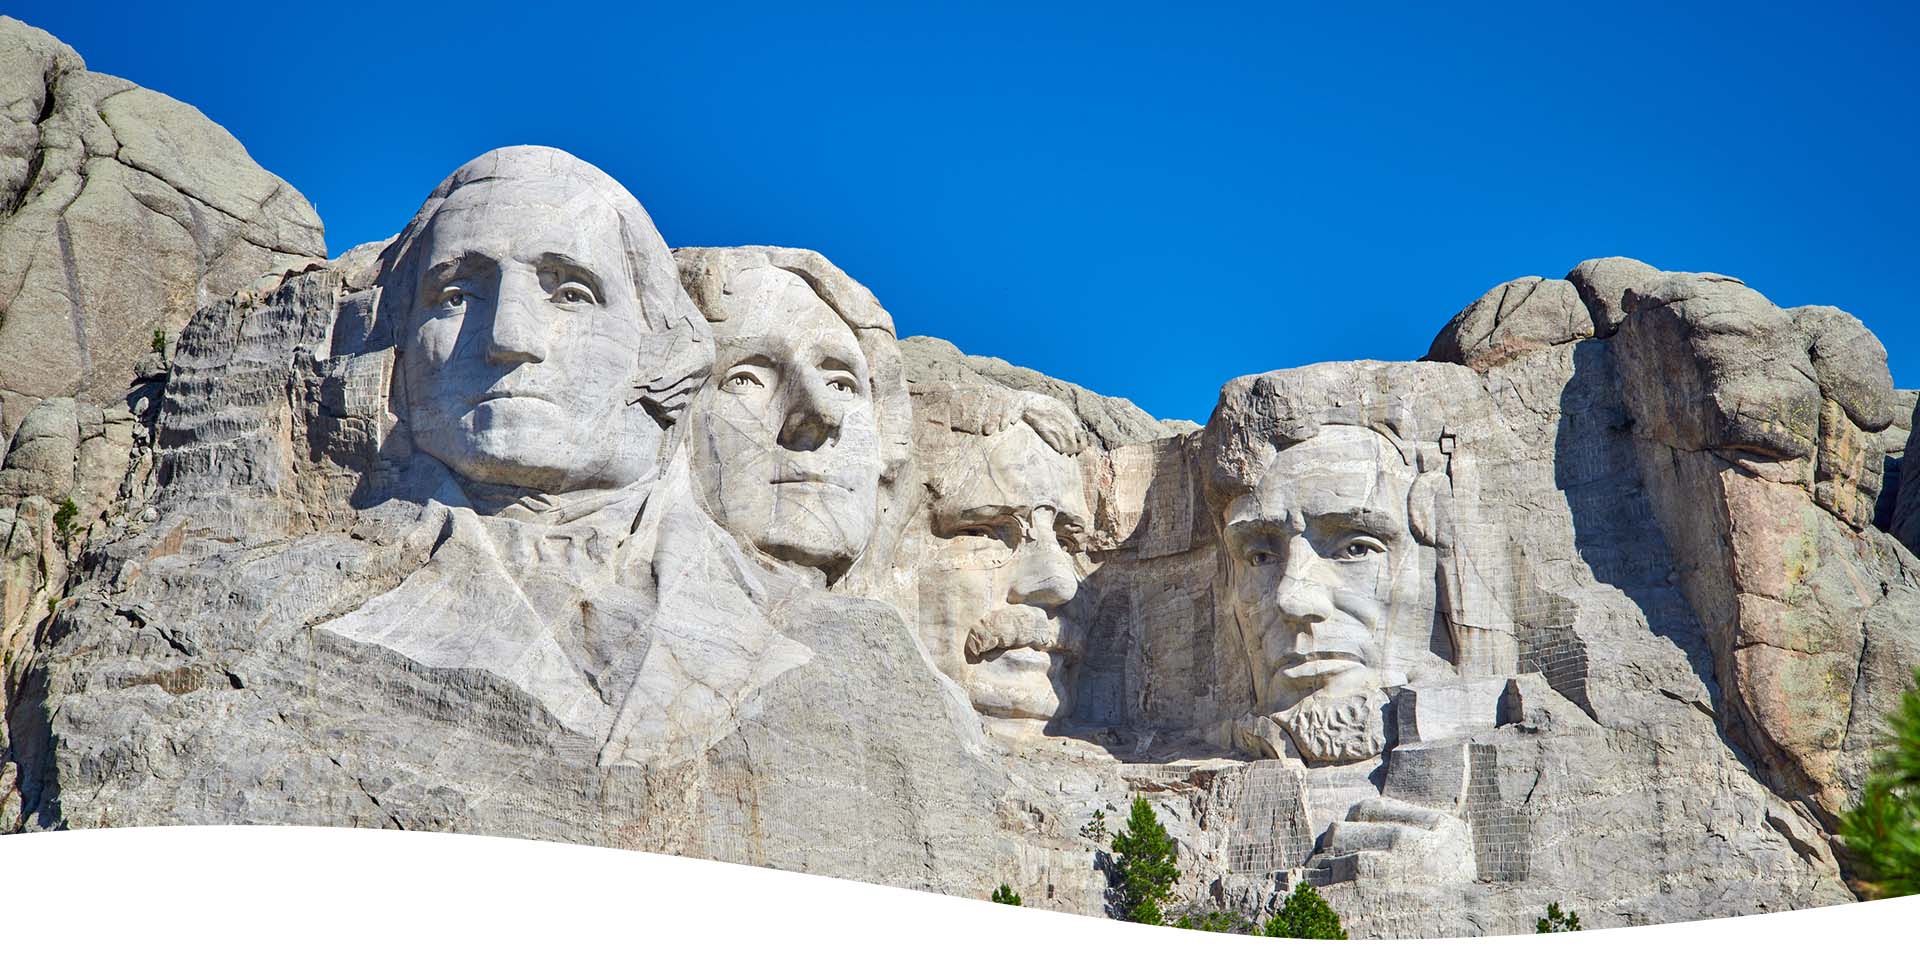 How to Plan a Road Trip to Mount Rushmore